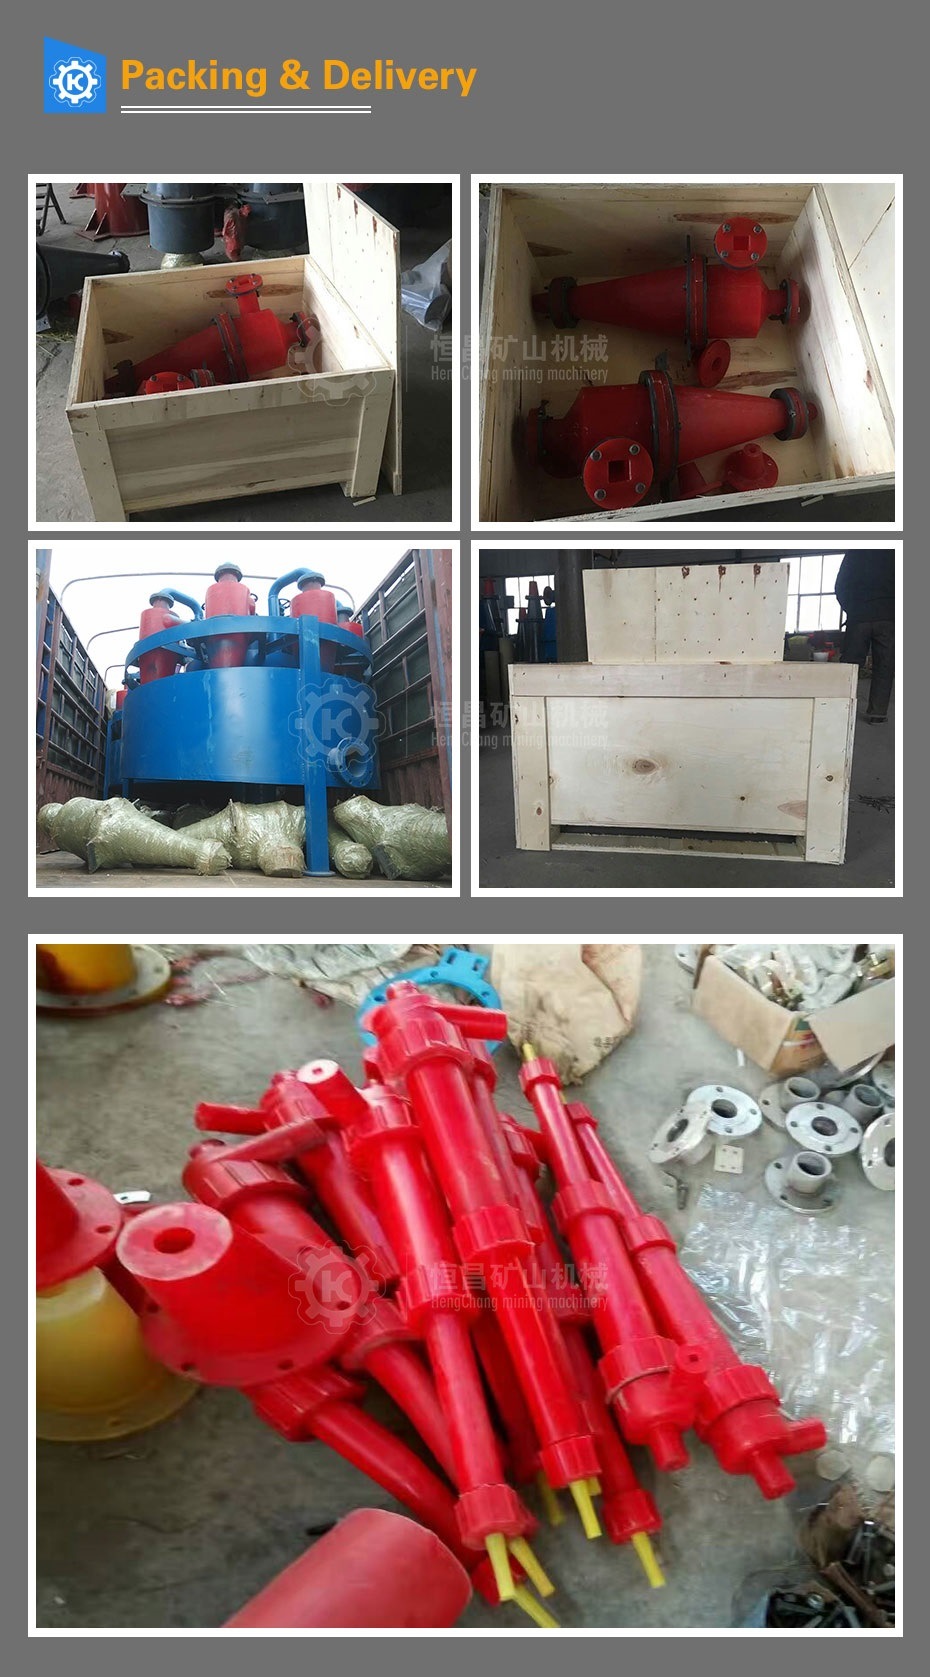 Most Popular Sand Separator Filter Cyclone Separator Hydrocyclone Separator for Sale